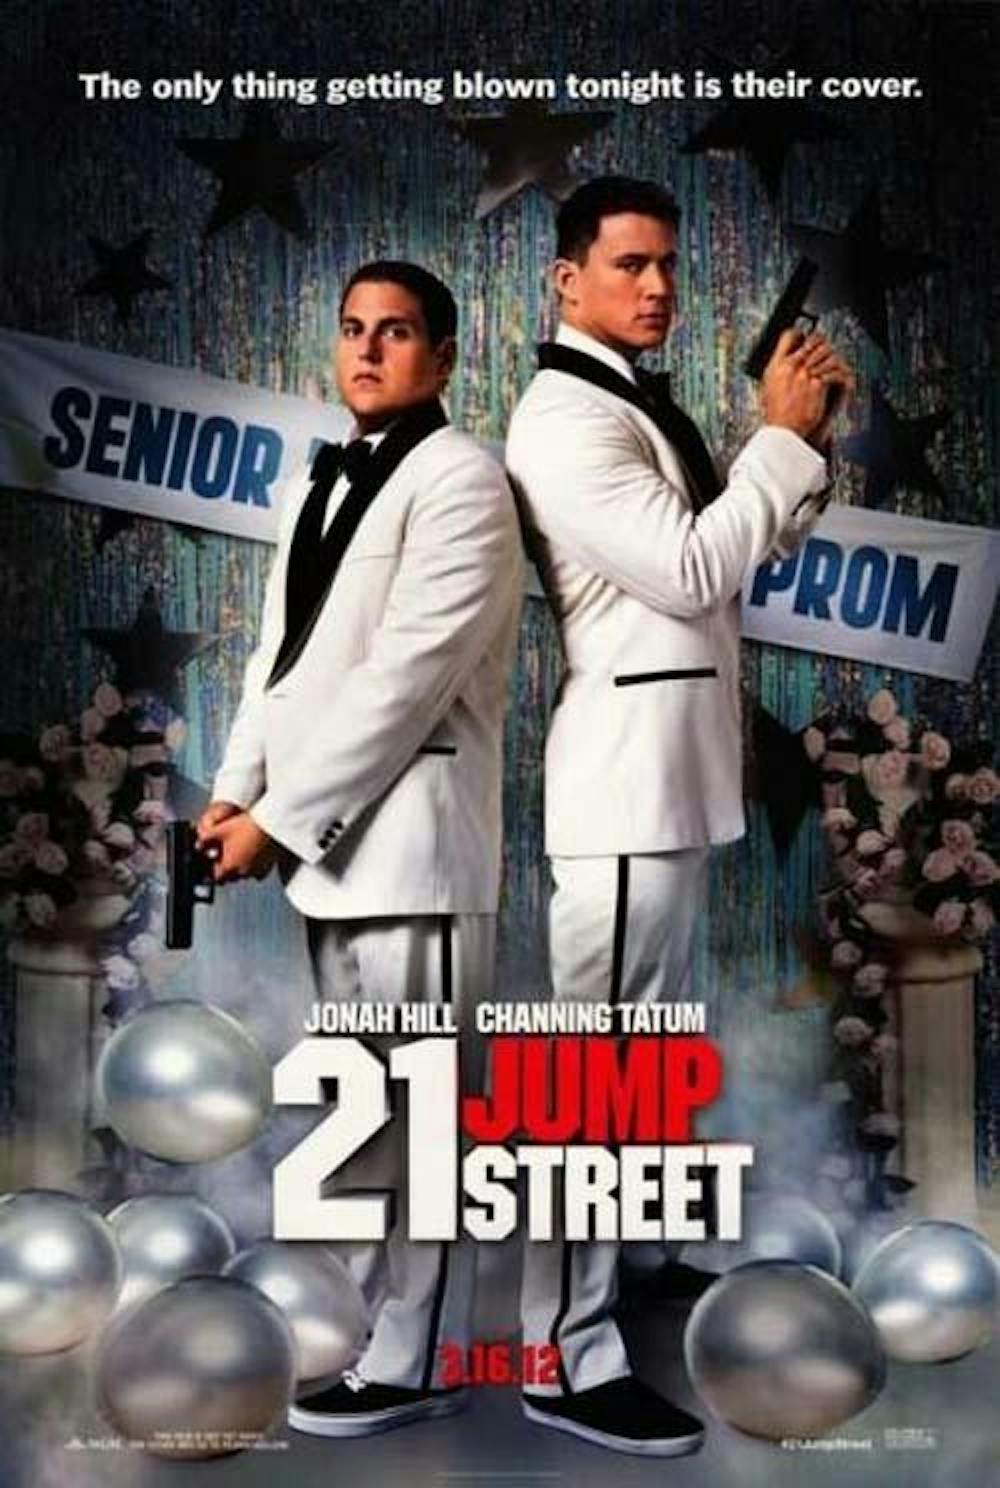 Head on over to 21 Jump Street - The Beacon